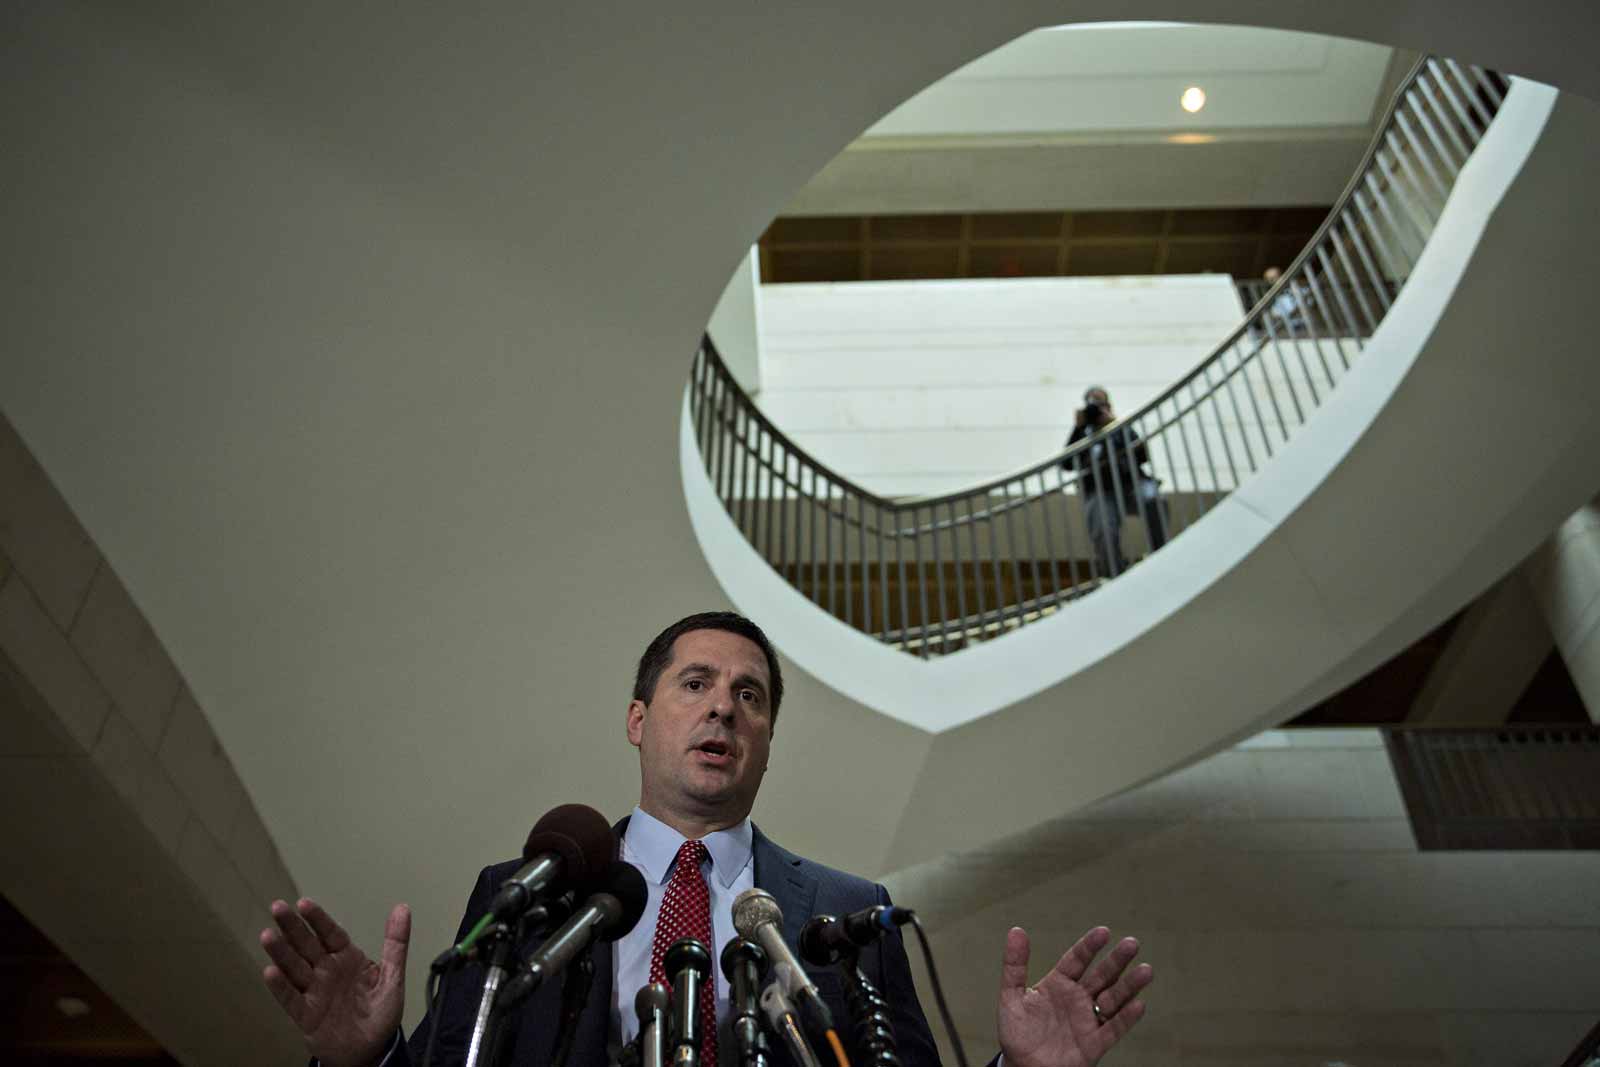 Devin Nunes, chairman of the House Intelligence Committee, at a news conference on Capitol Hill, Washington, D.C., February 27, 2017